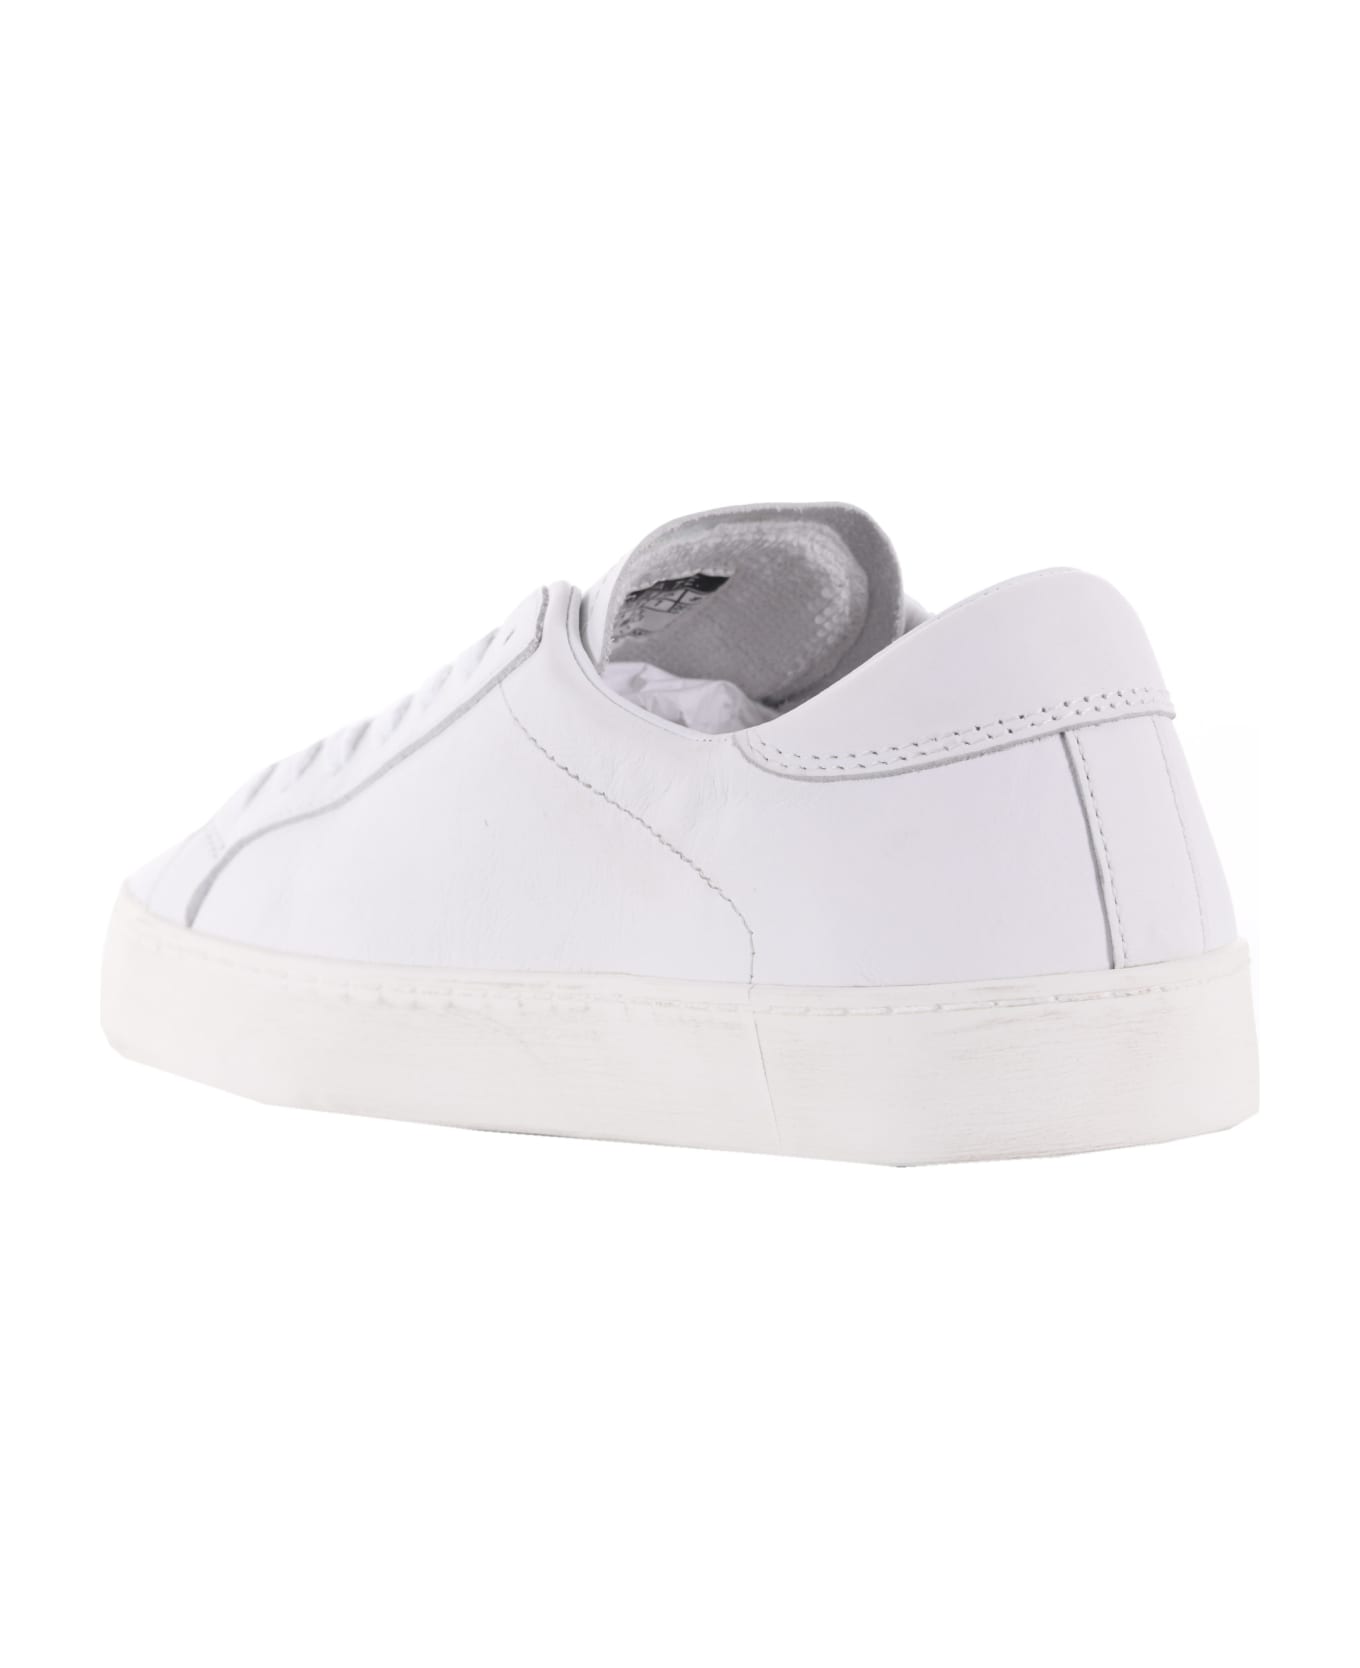 D.A.T.E. Men's Sneakers In Leather - Bianco